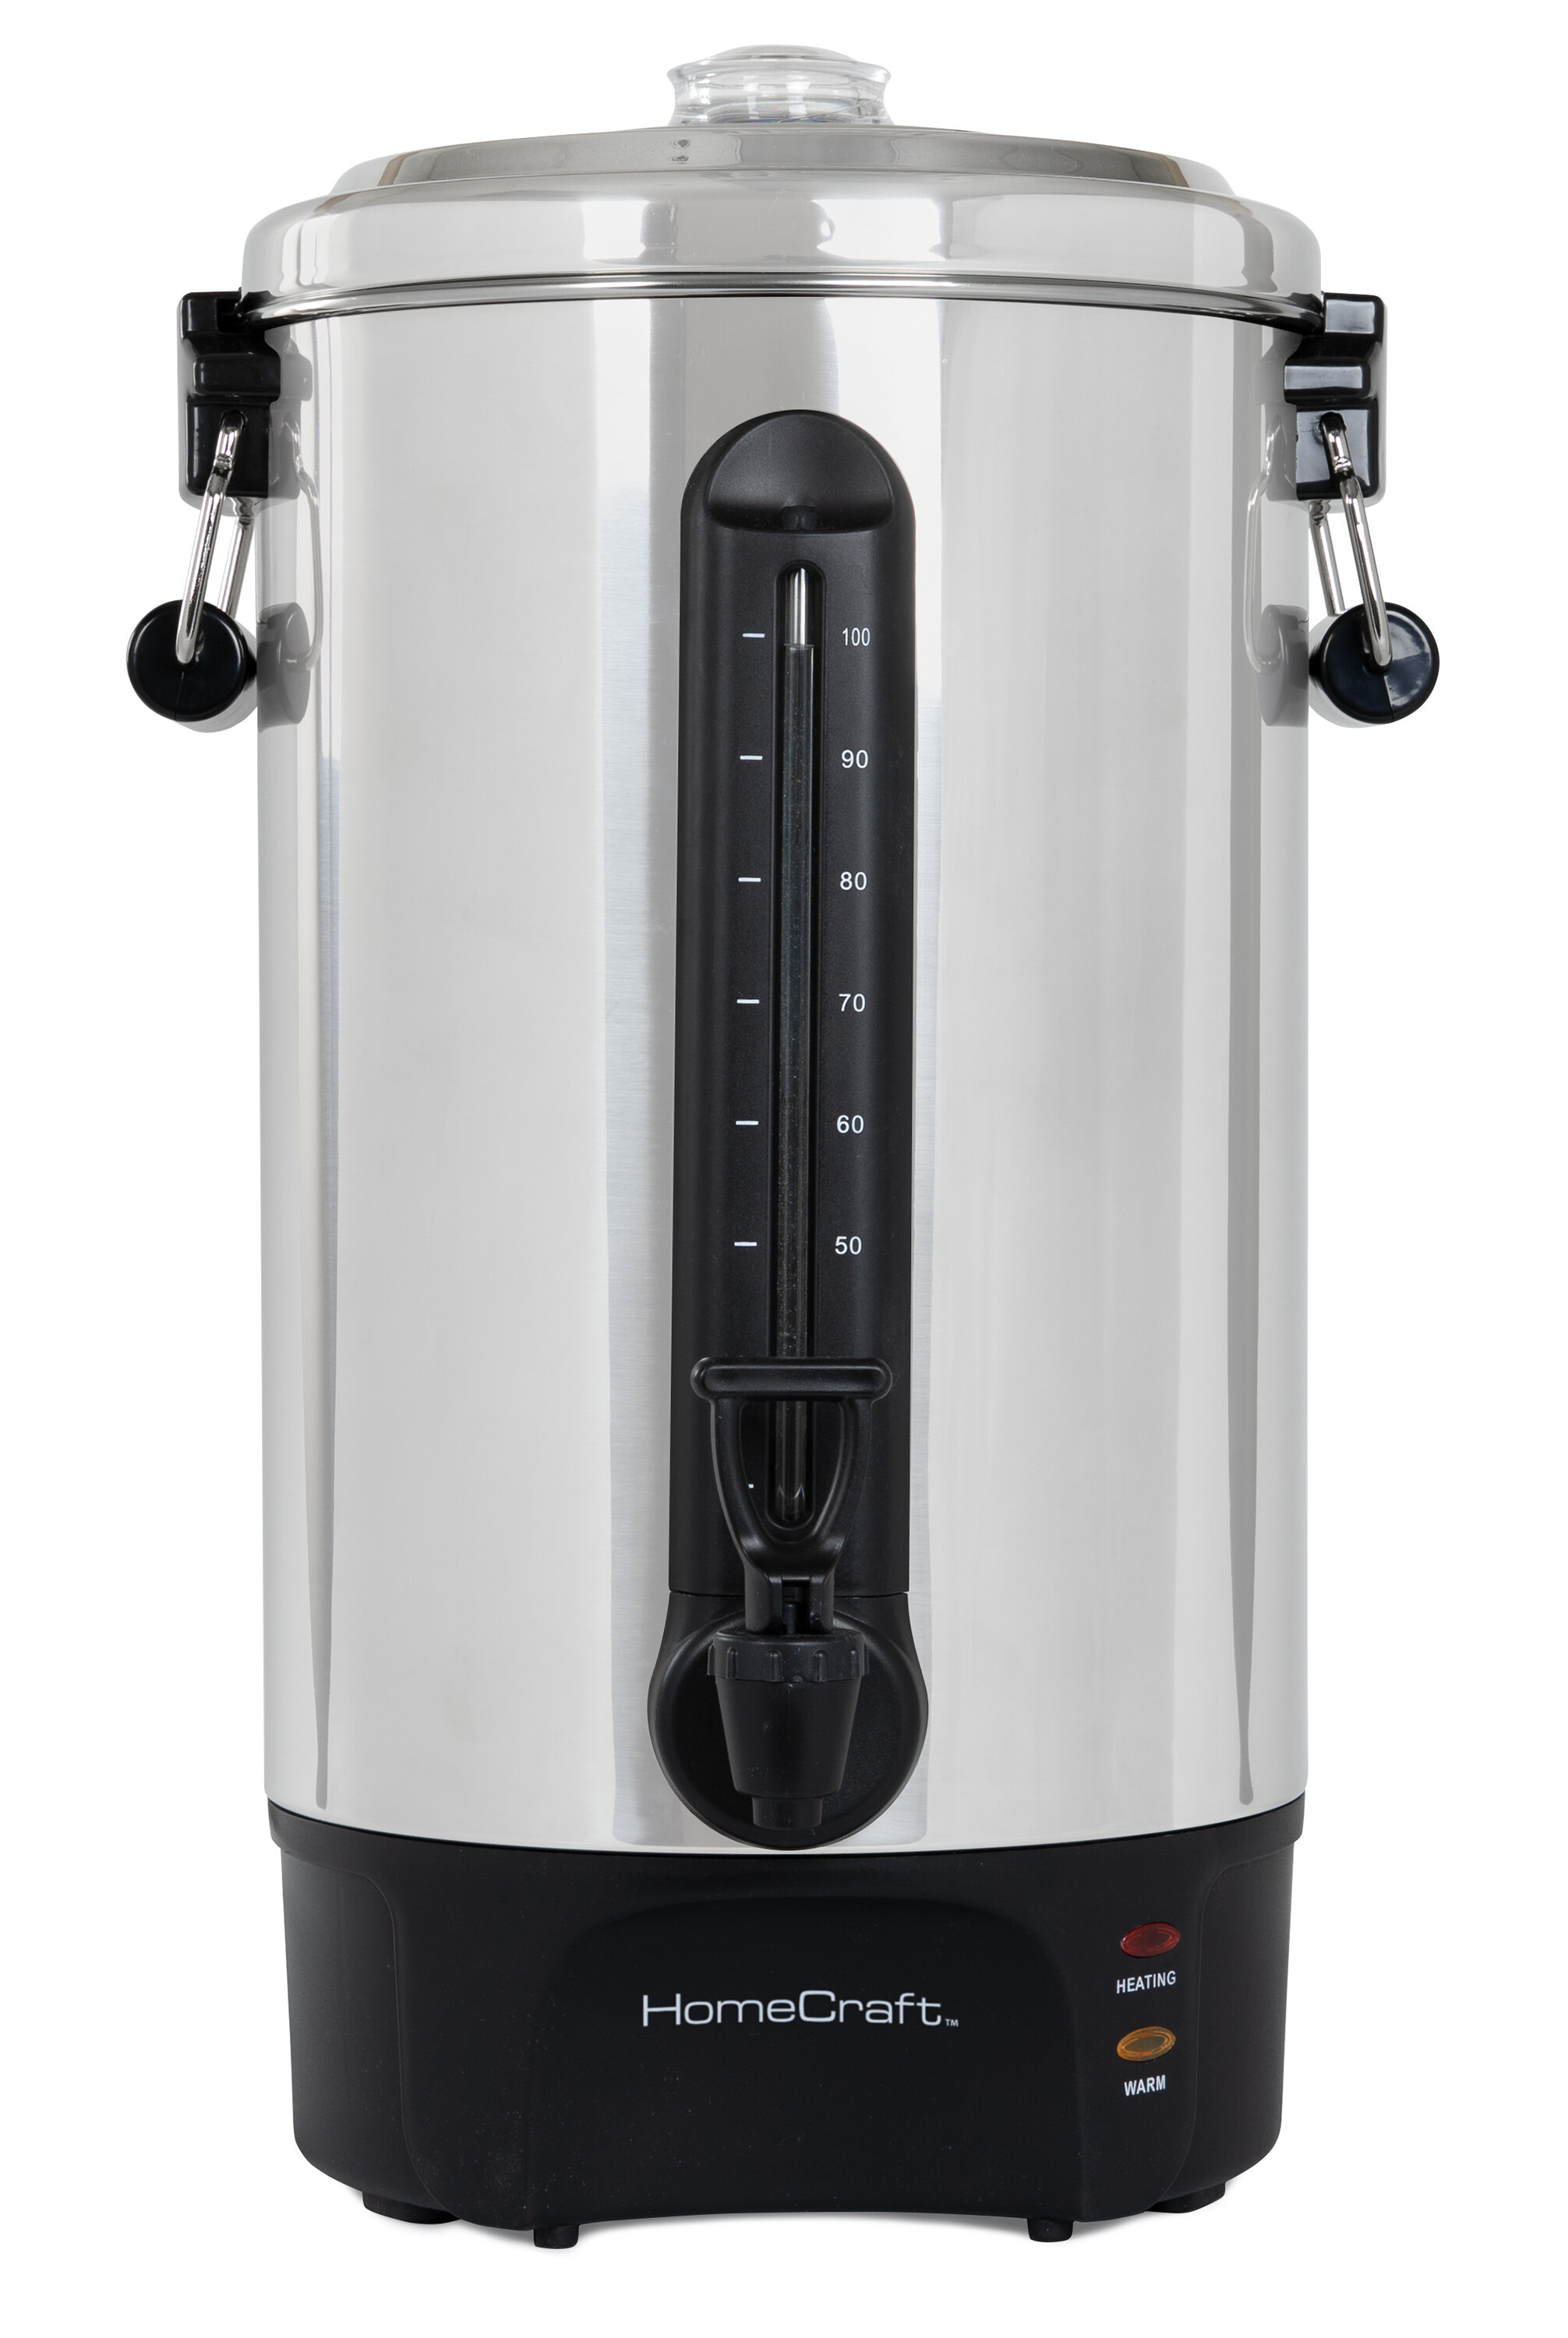 VEVOR Commercial Coffee Urn 50 Cup Stainless Steel Coffee Dispenser Fast Brew